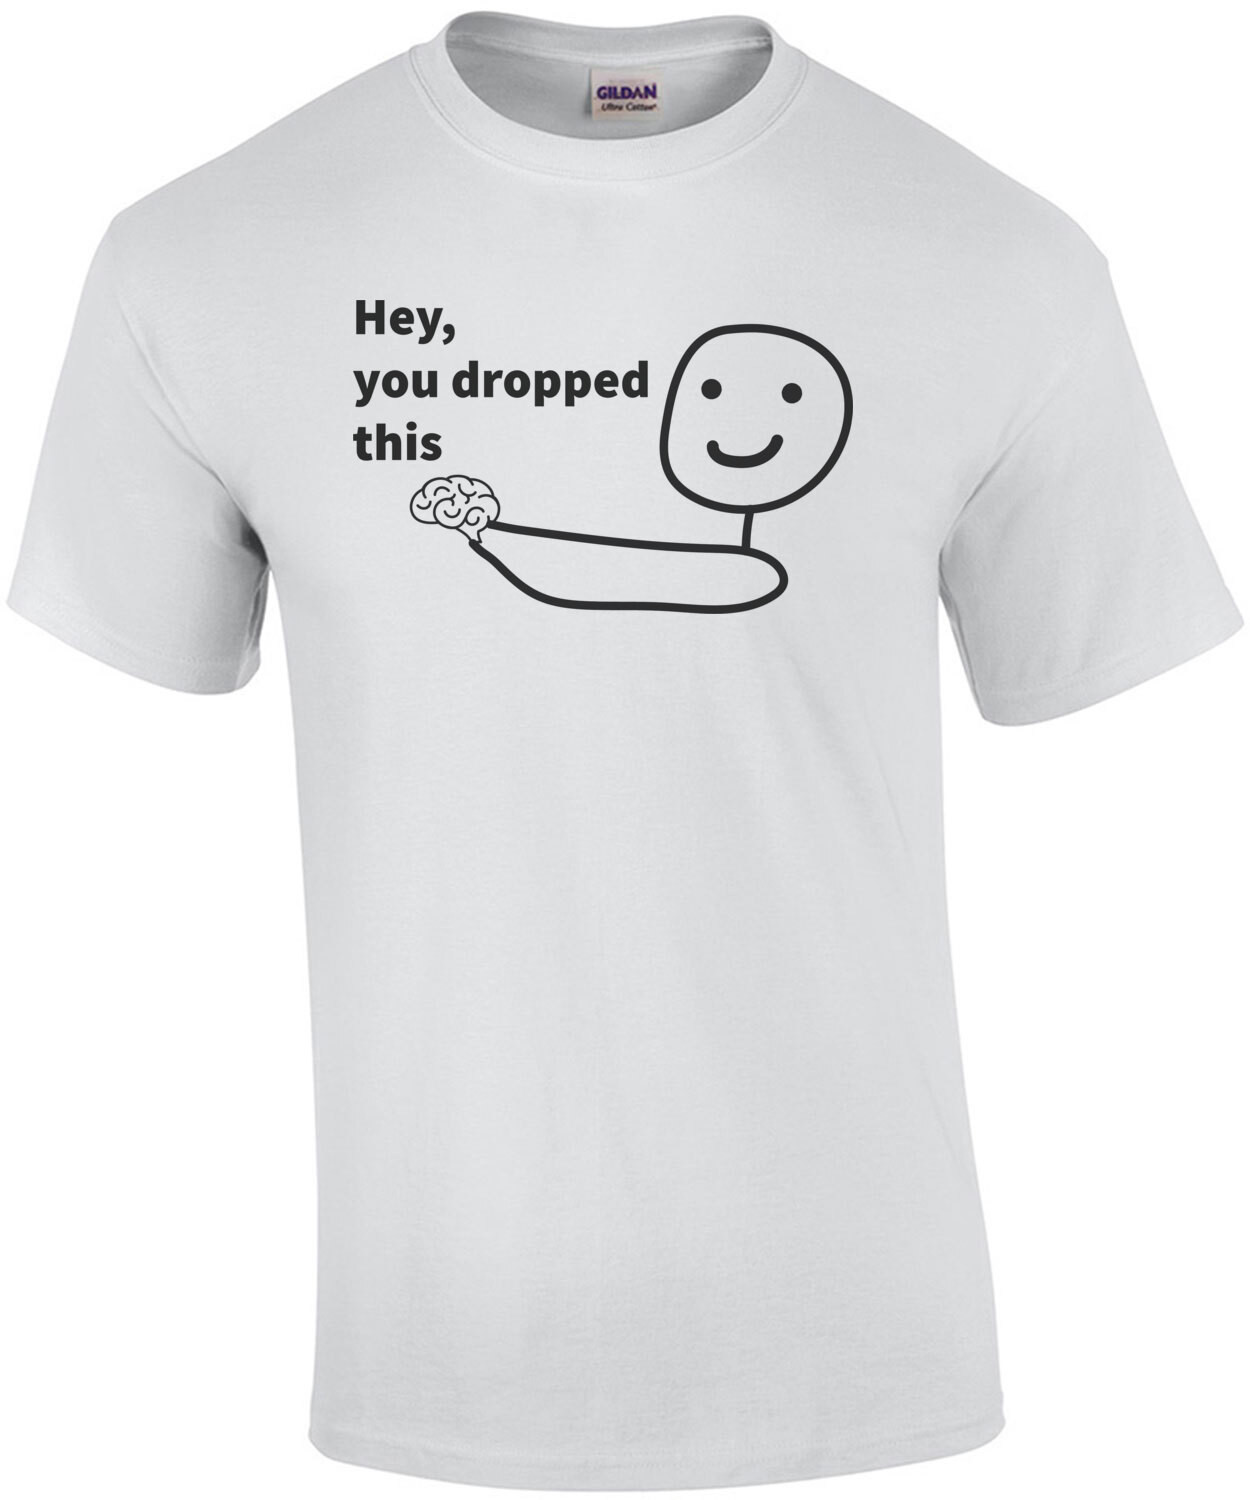 Hey, you dropped this. Funny t-shirt